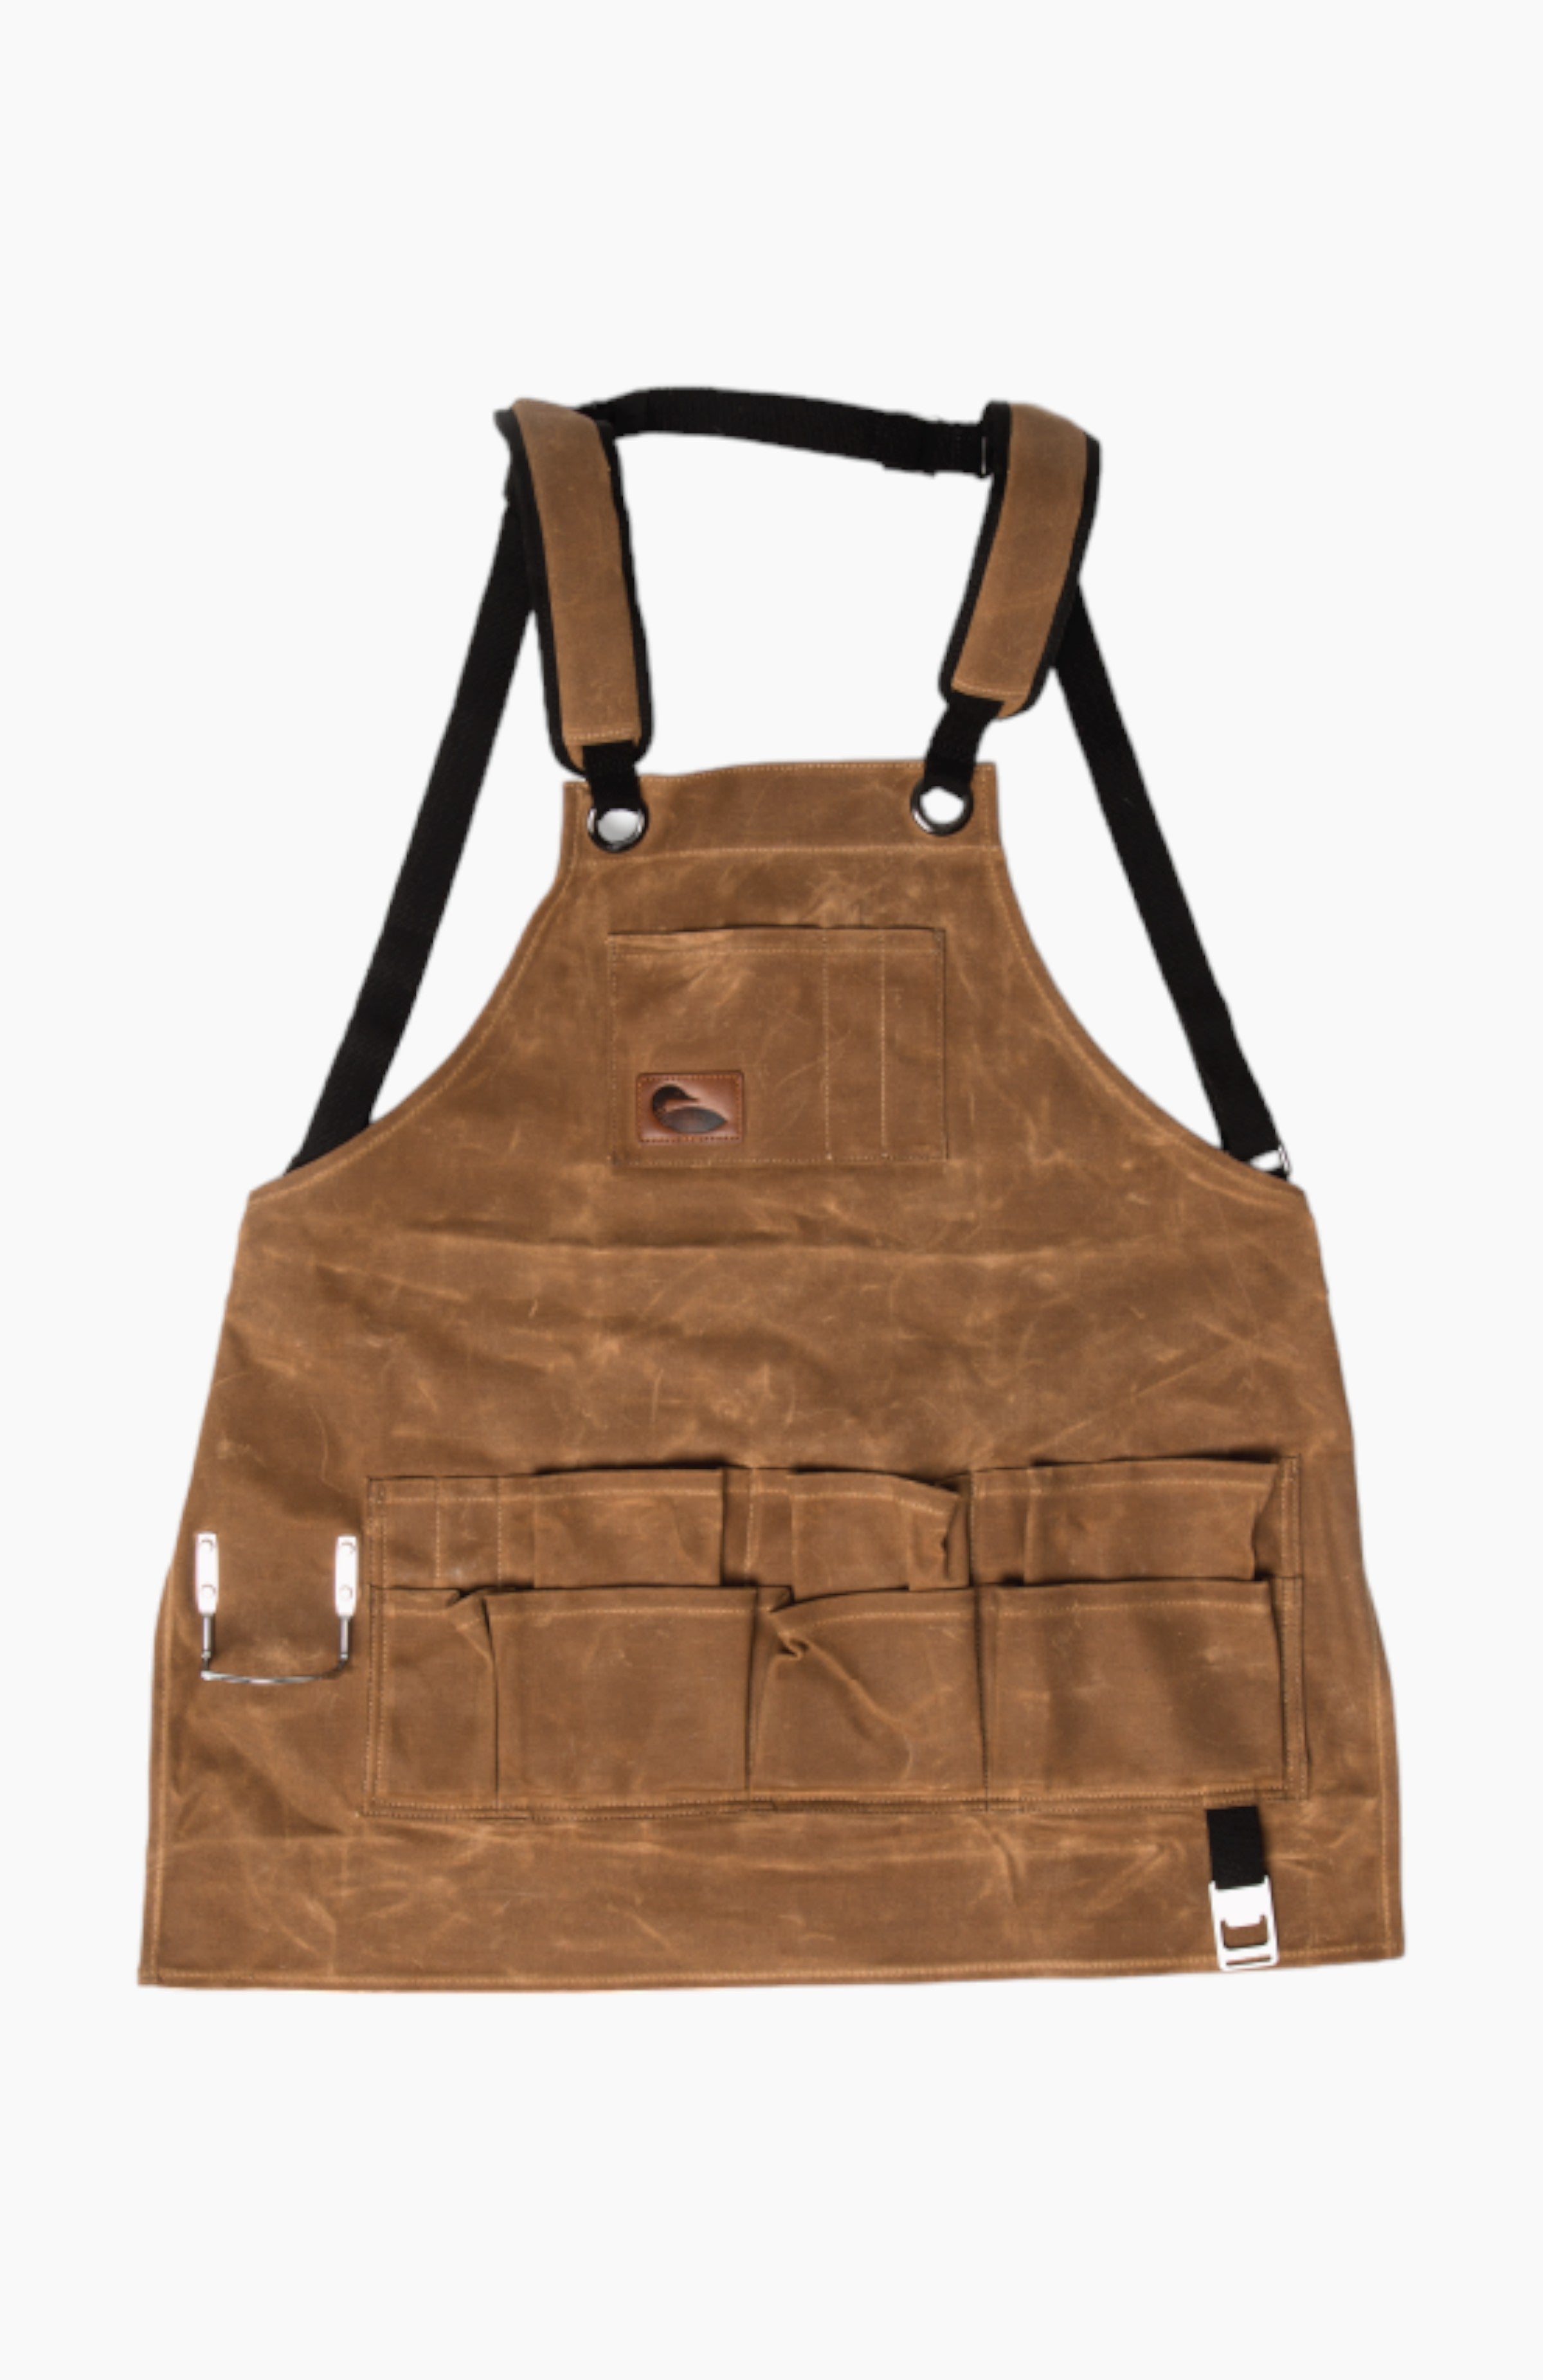 Brown leather apron with several pockets on the front and black straps.